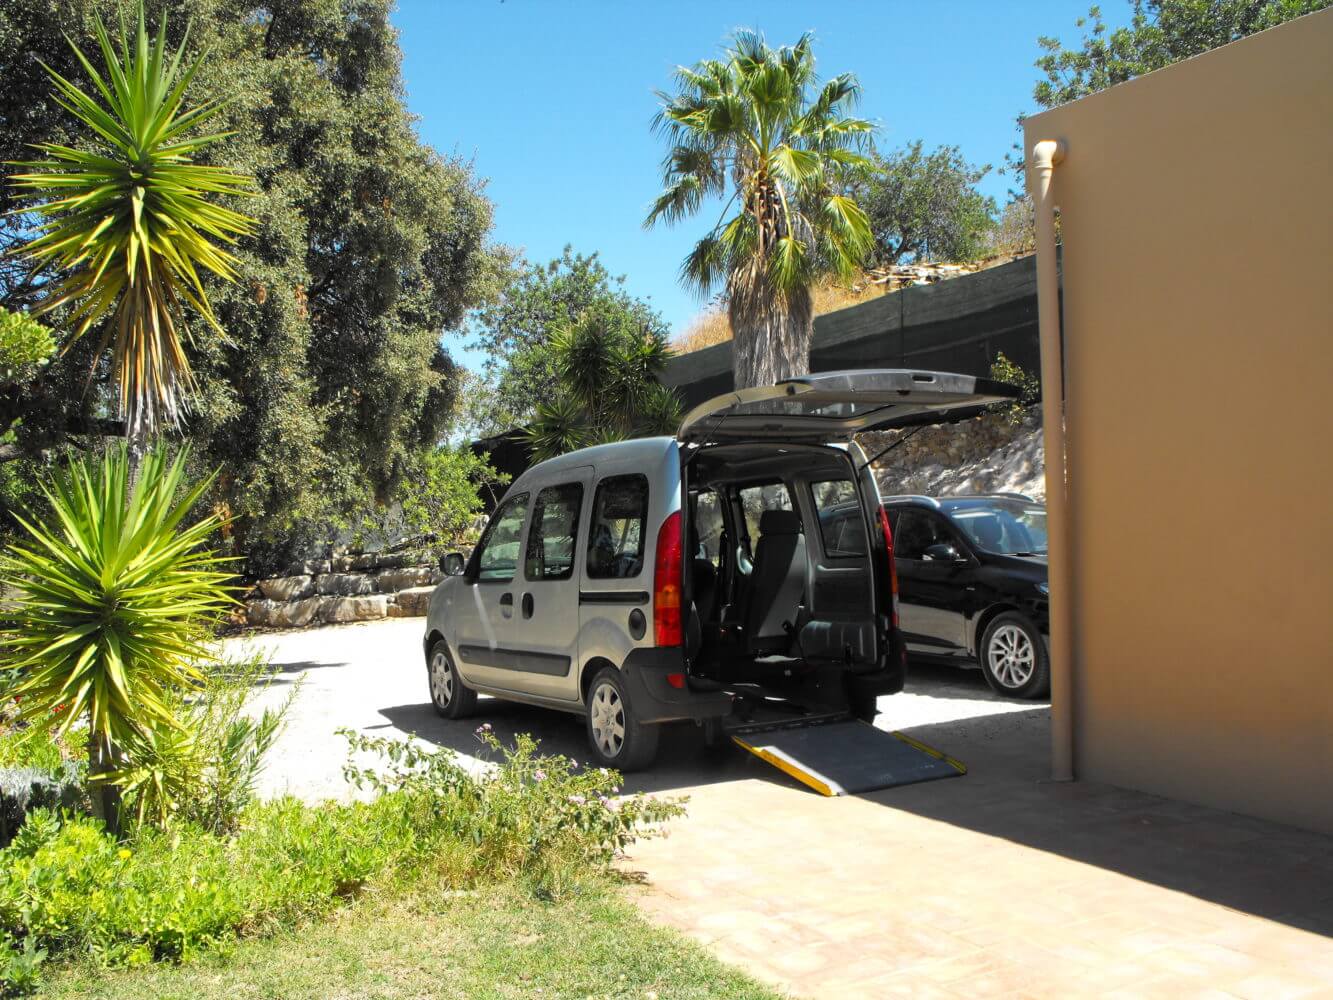 holiday accommodation for the disabled, including a wheelchair accessible car, WAV, accessible algarve, portugal for the disabled